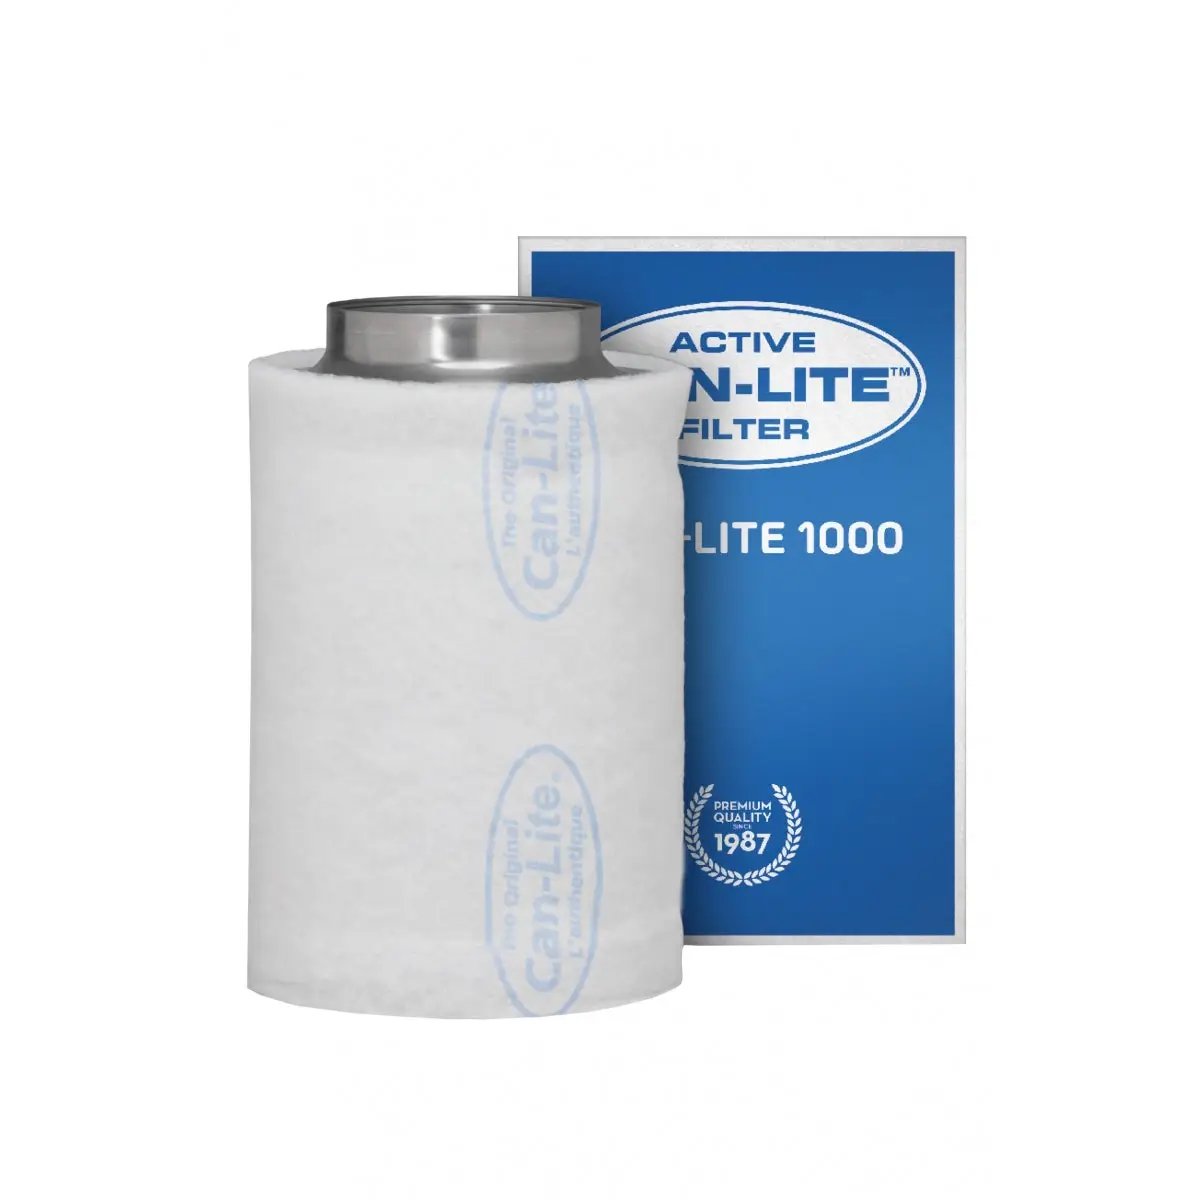 Can-Lite 1000 200mm (1000m3/h)